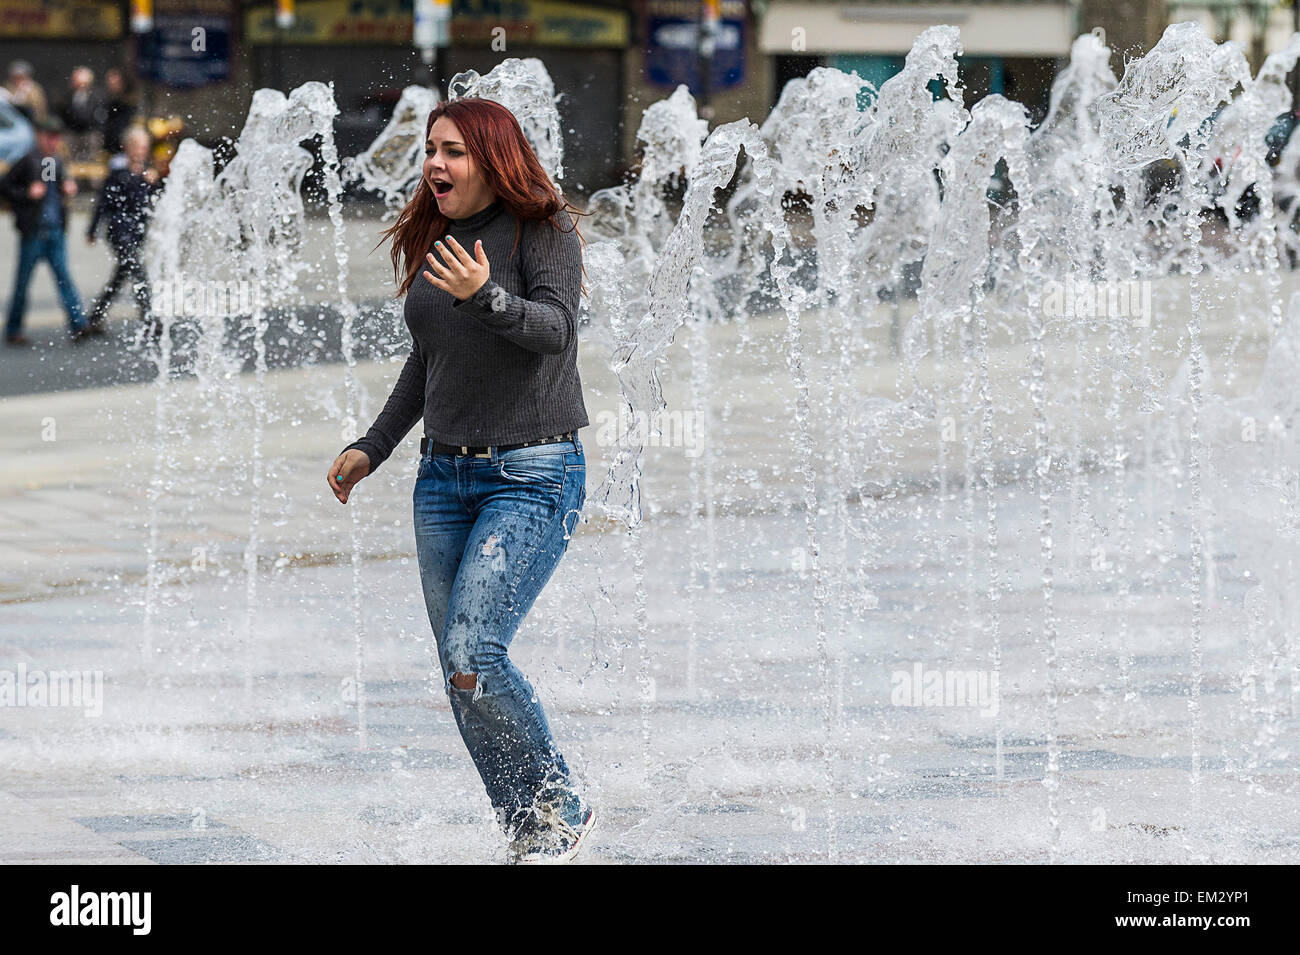 A girl running through the fountain on Southend seafront in Essex. Stock Photo